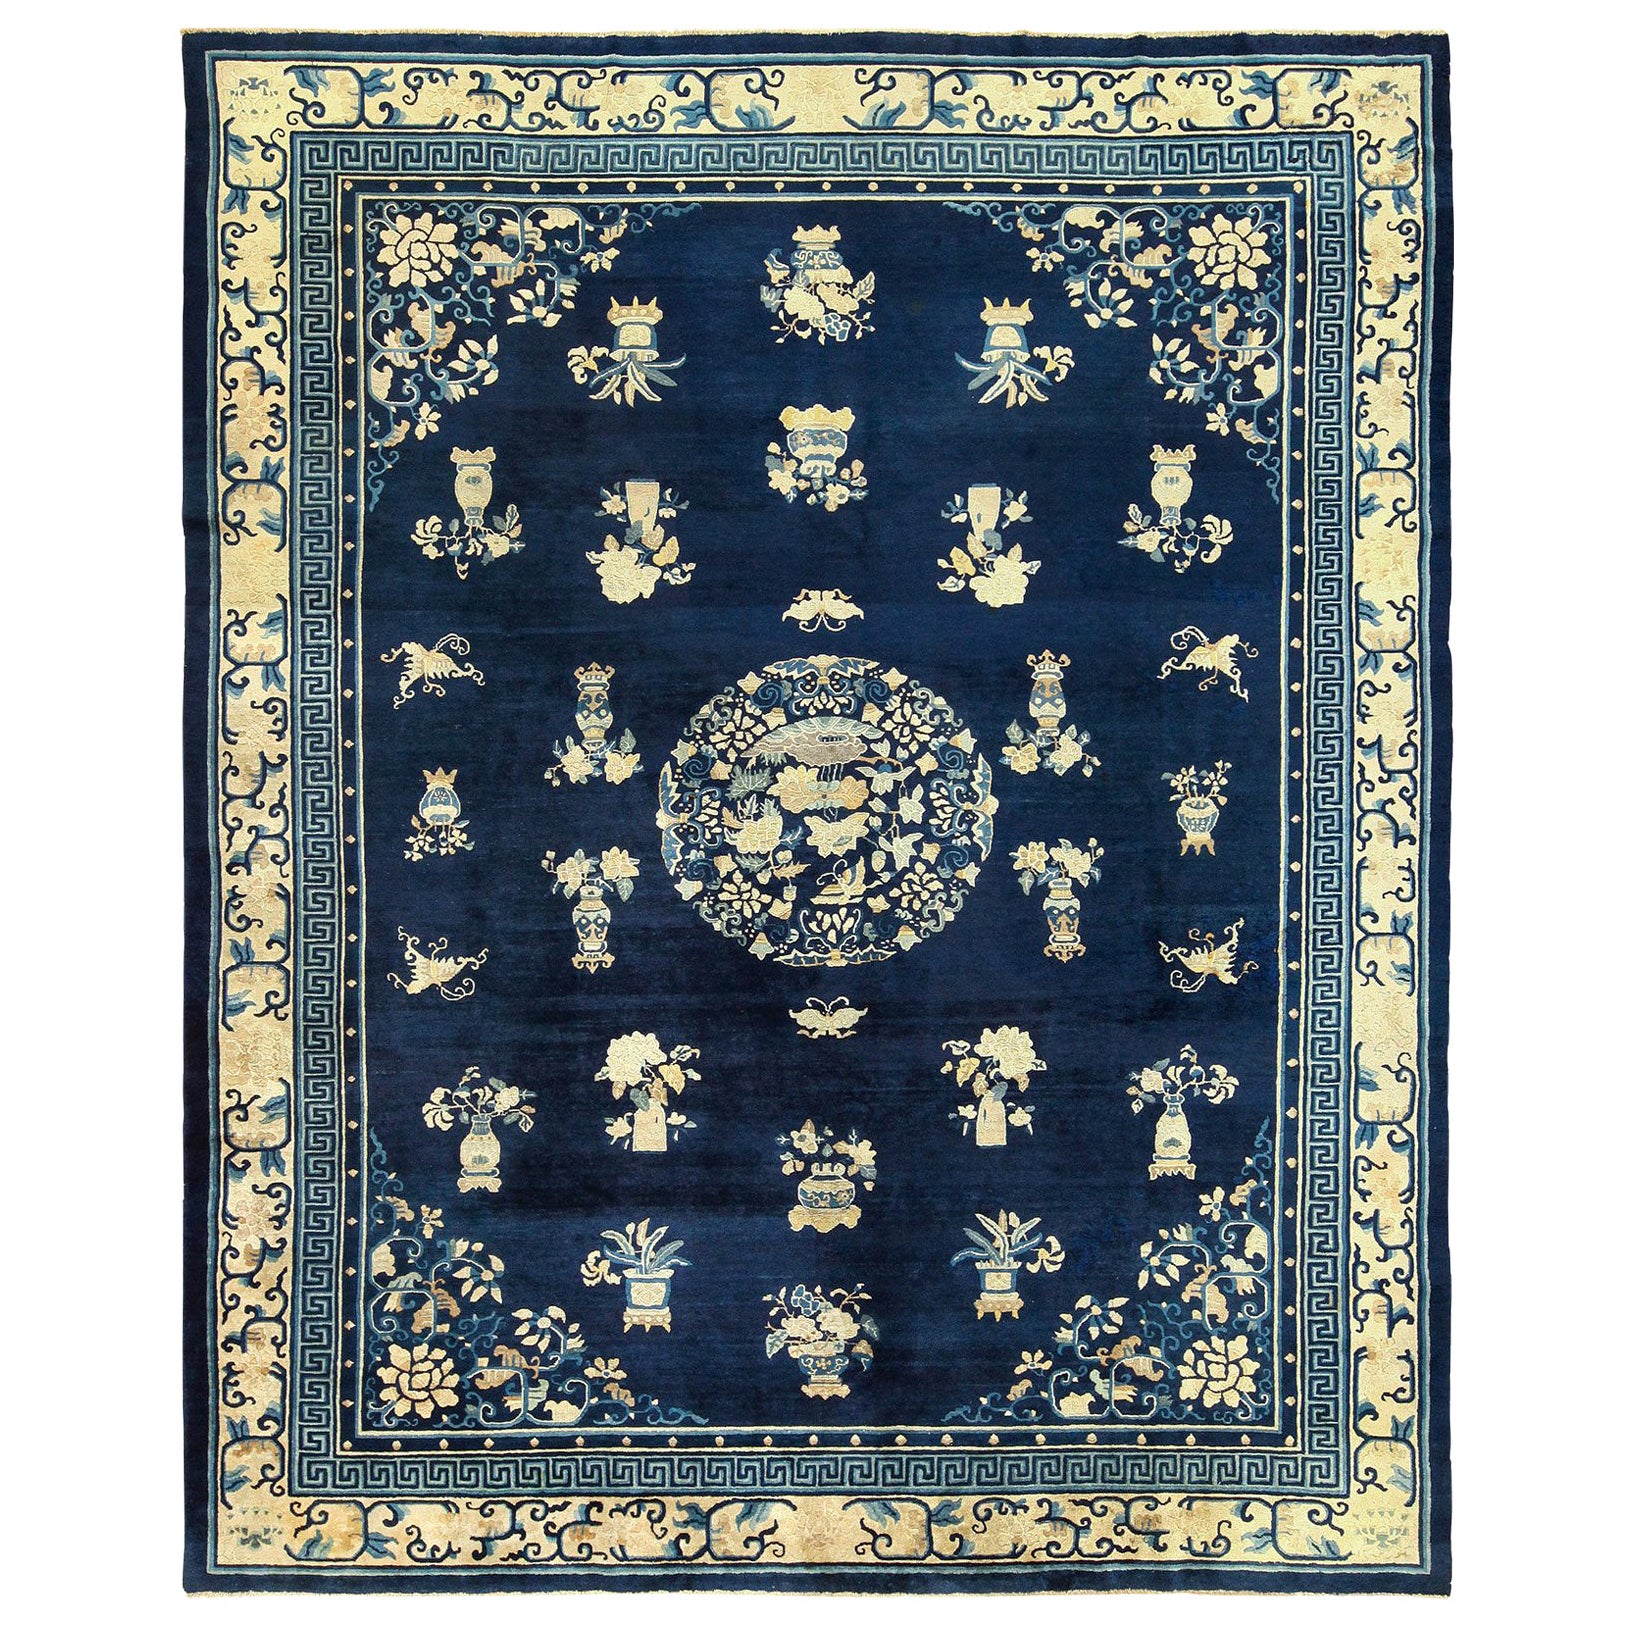 Nazmiyal Collection Antique Chinese Rug. Size: 9 ft 1 in x 11 ft 6 in 